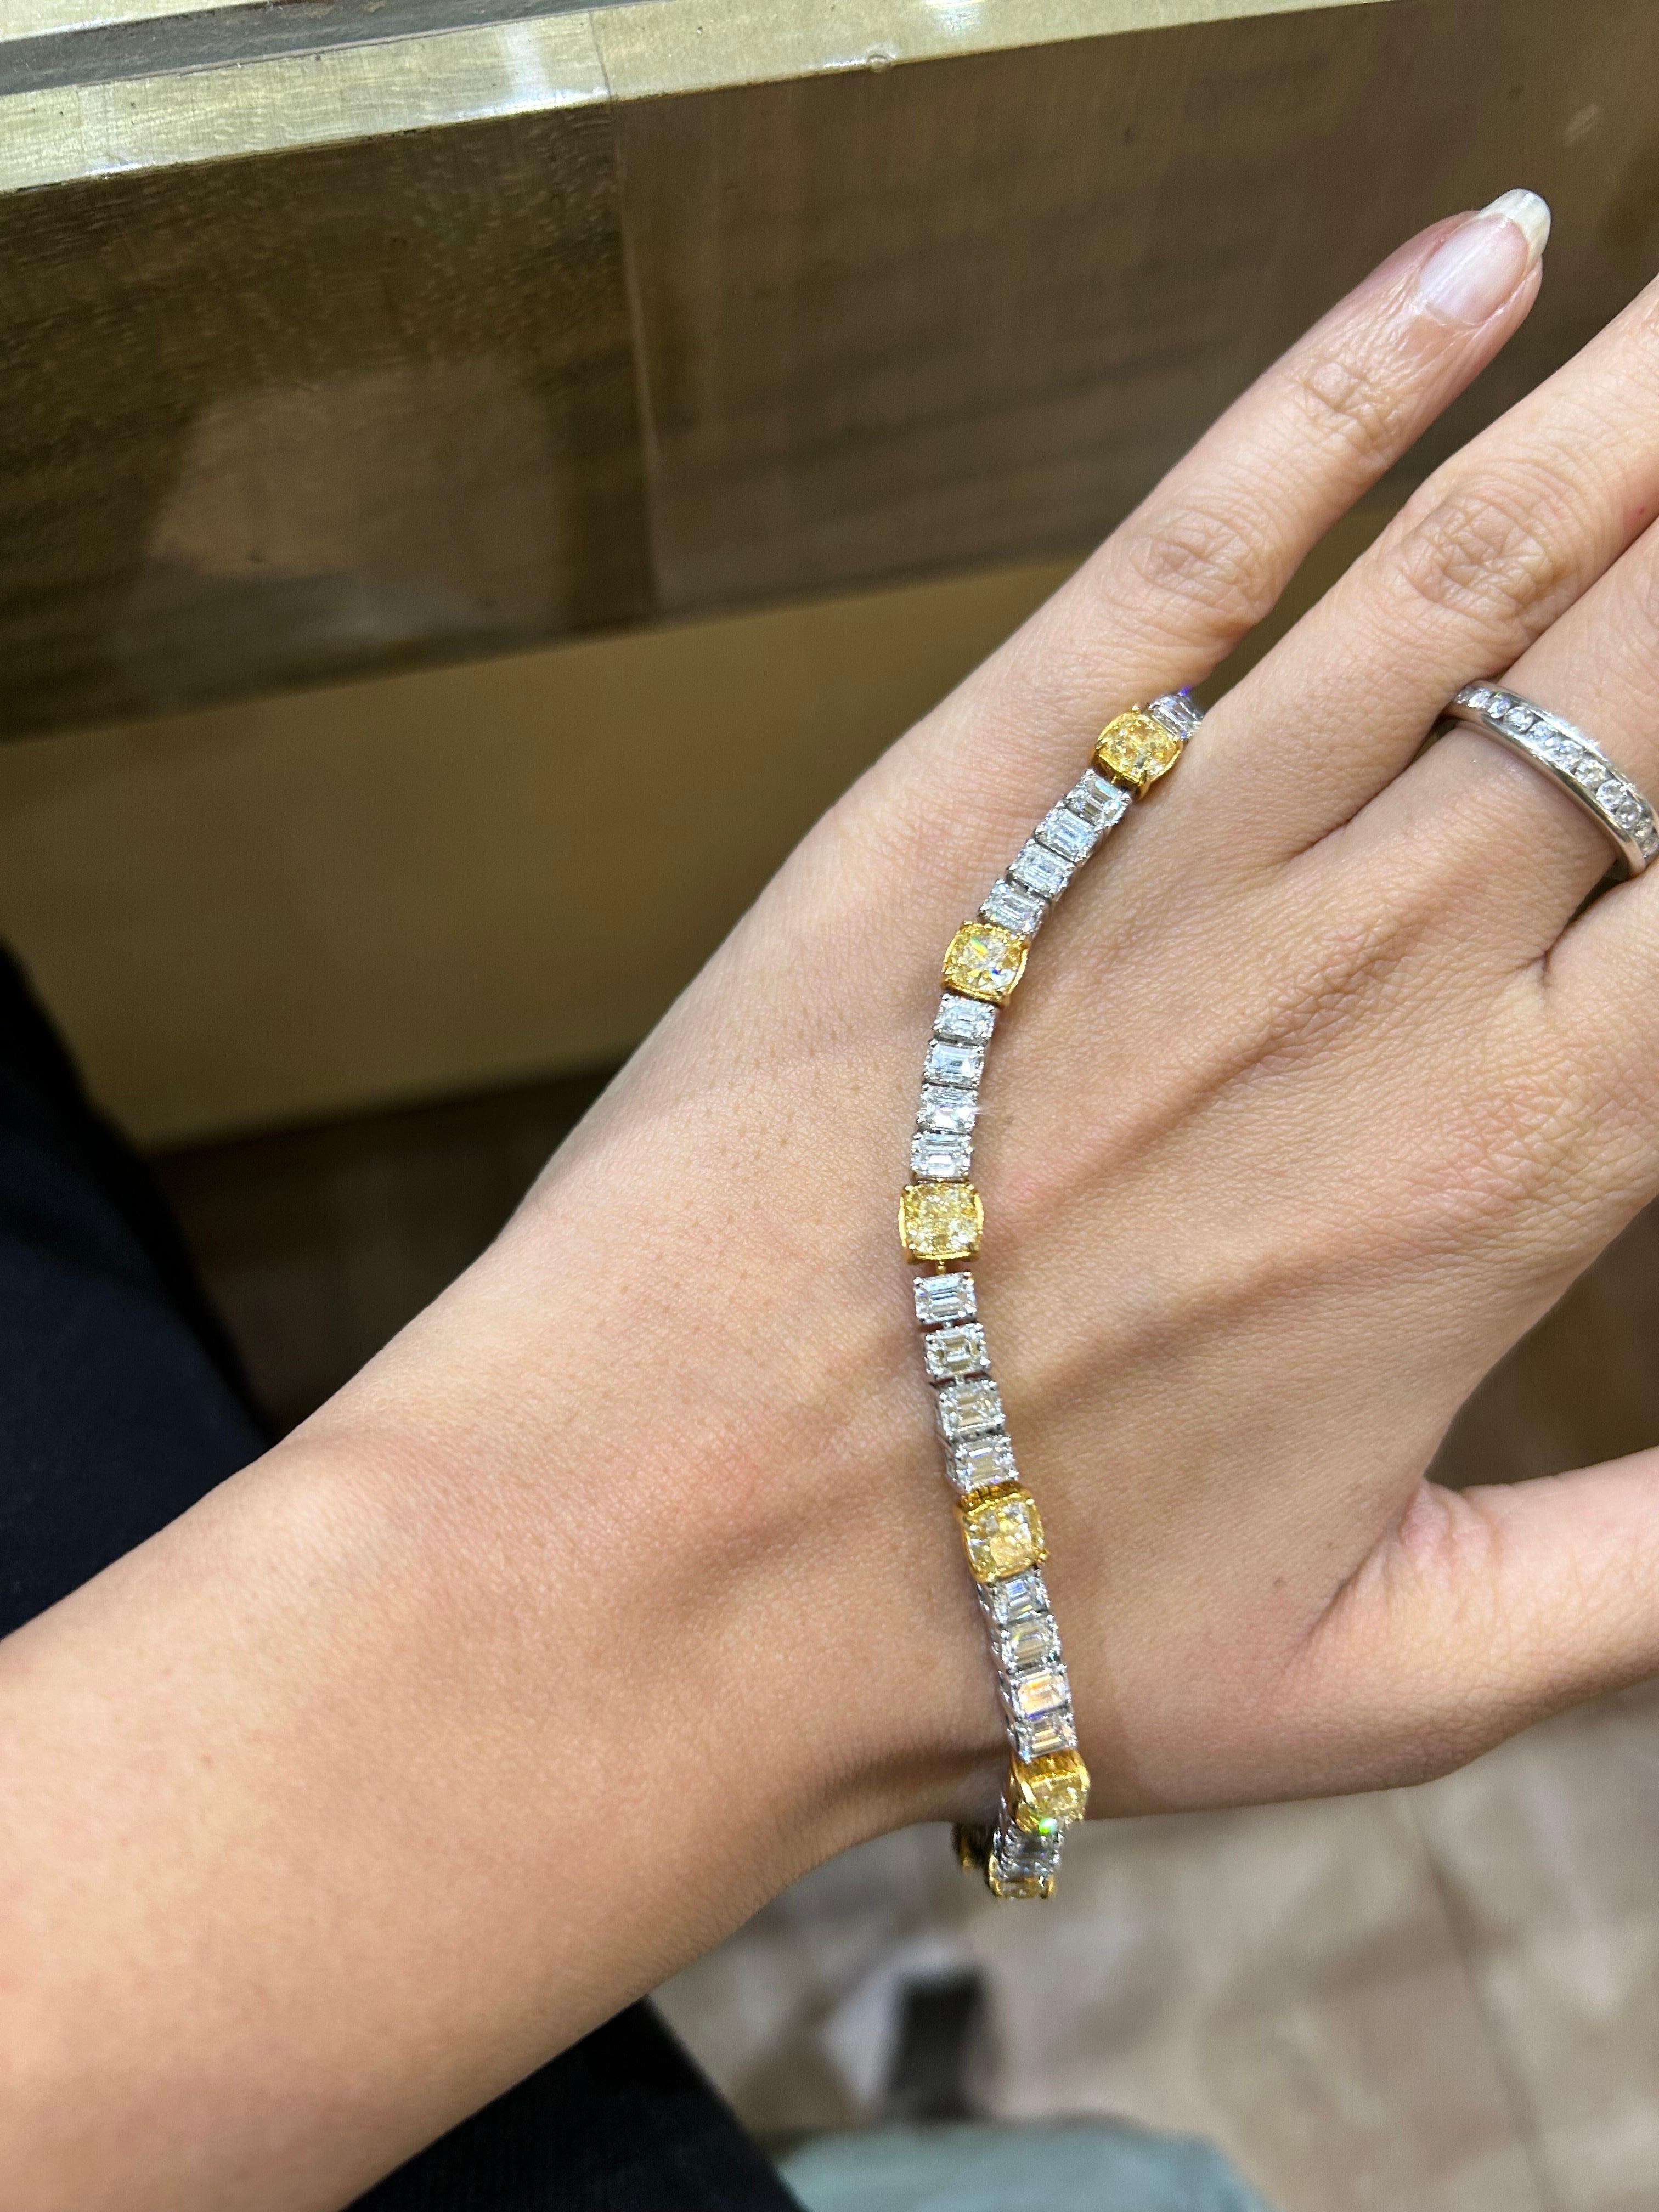 A beautifully created 8.08 carat cushion cut Yellow Diamond weighing 1 carat each, and 7.85 carat emerald cut (weighing around 0.25 carats each) White Diamond bracelet set in 18K Gold. Currently 6.7 inches long. 